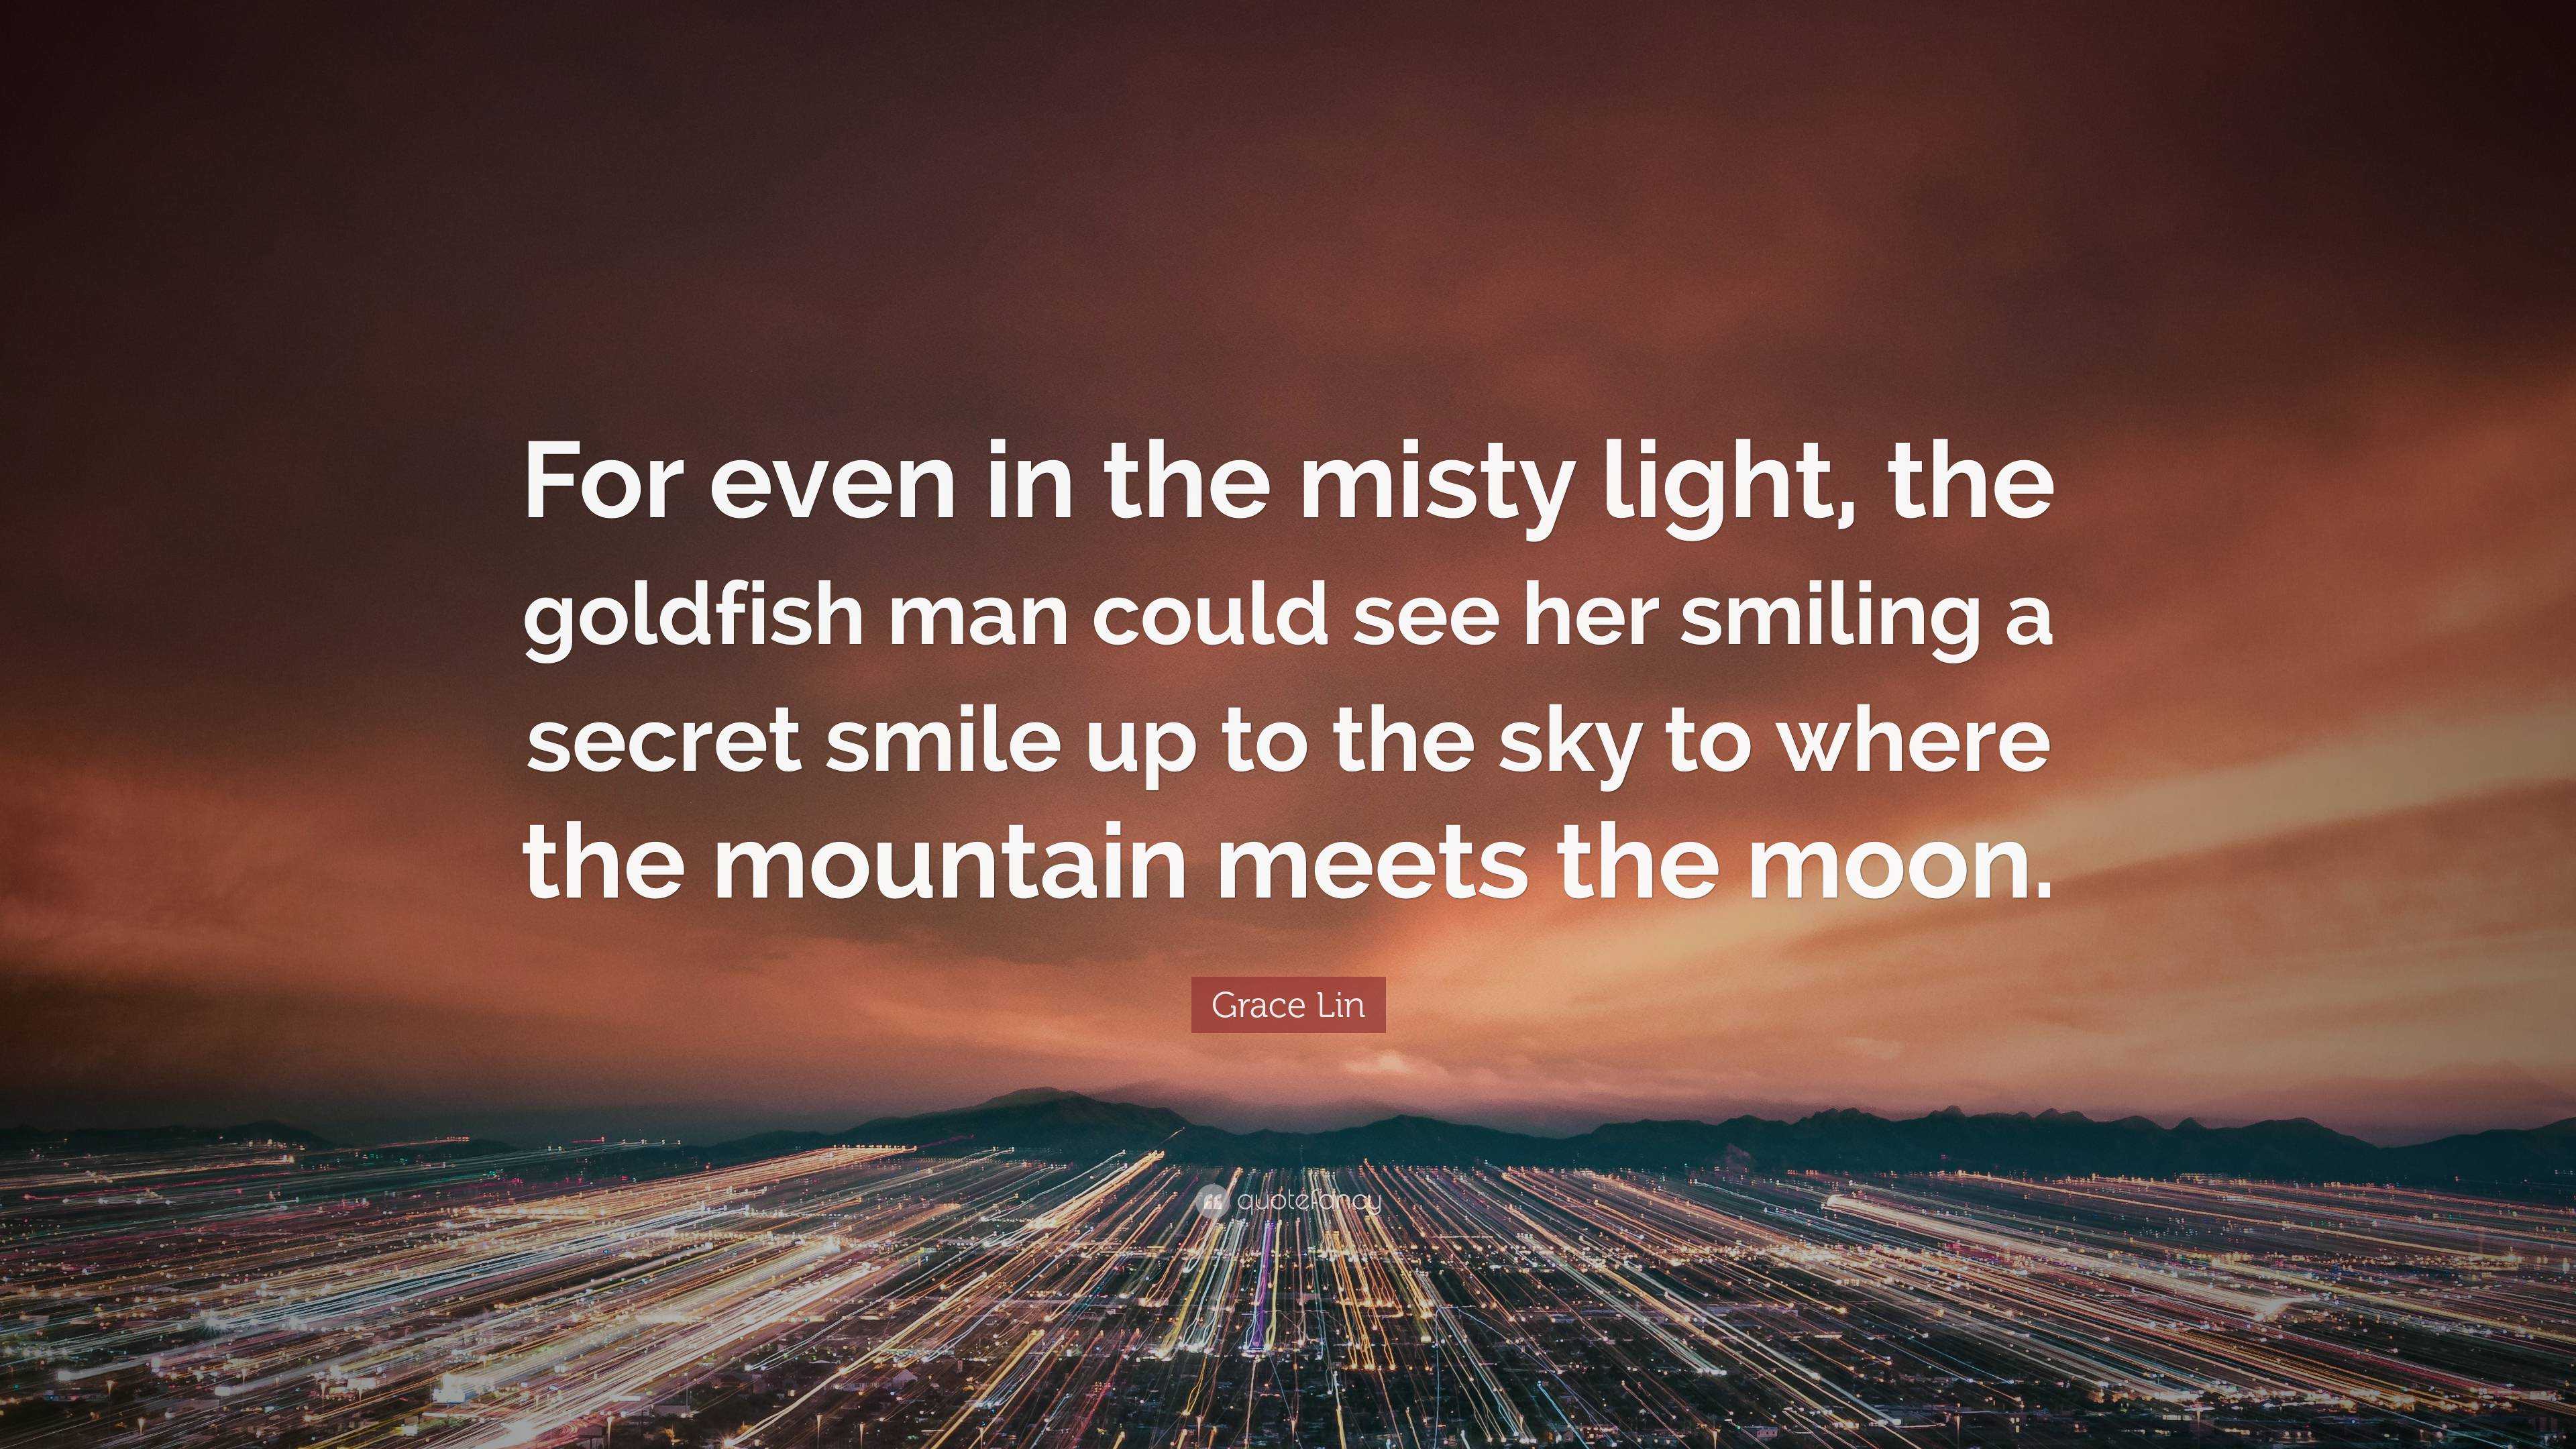 Grace Lin Quote: “For even in the misty light, the goldfish man could see  her smiling a secret smile up to the sky to where the mountain m”